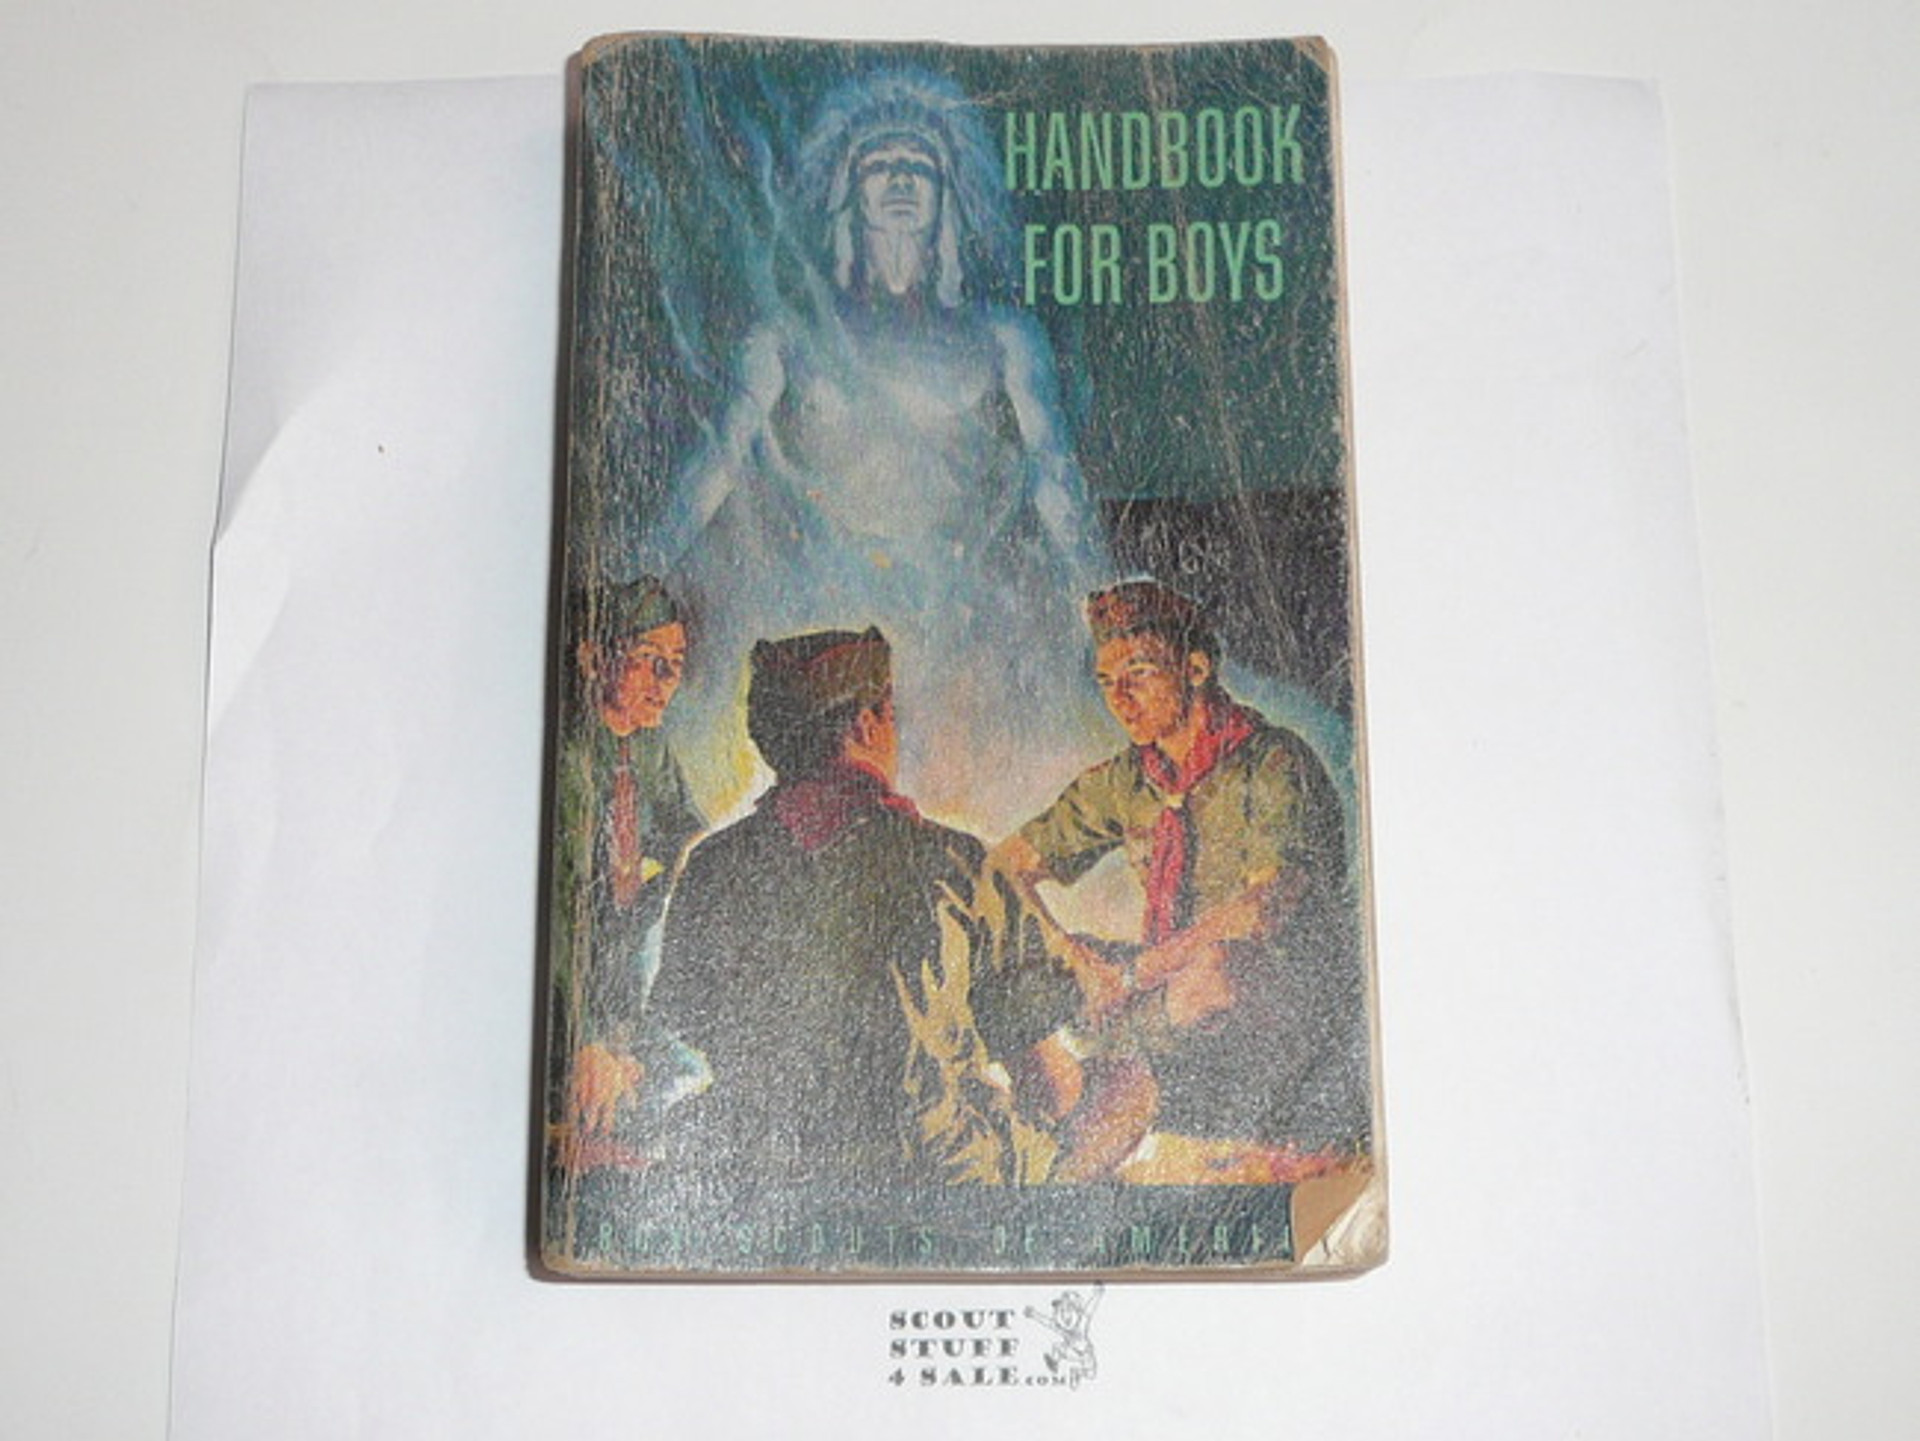 1954 Boy Scout Handbook Fifth Edition Seventh Printing Used condition